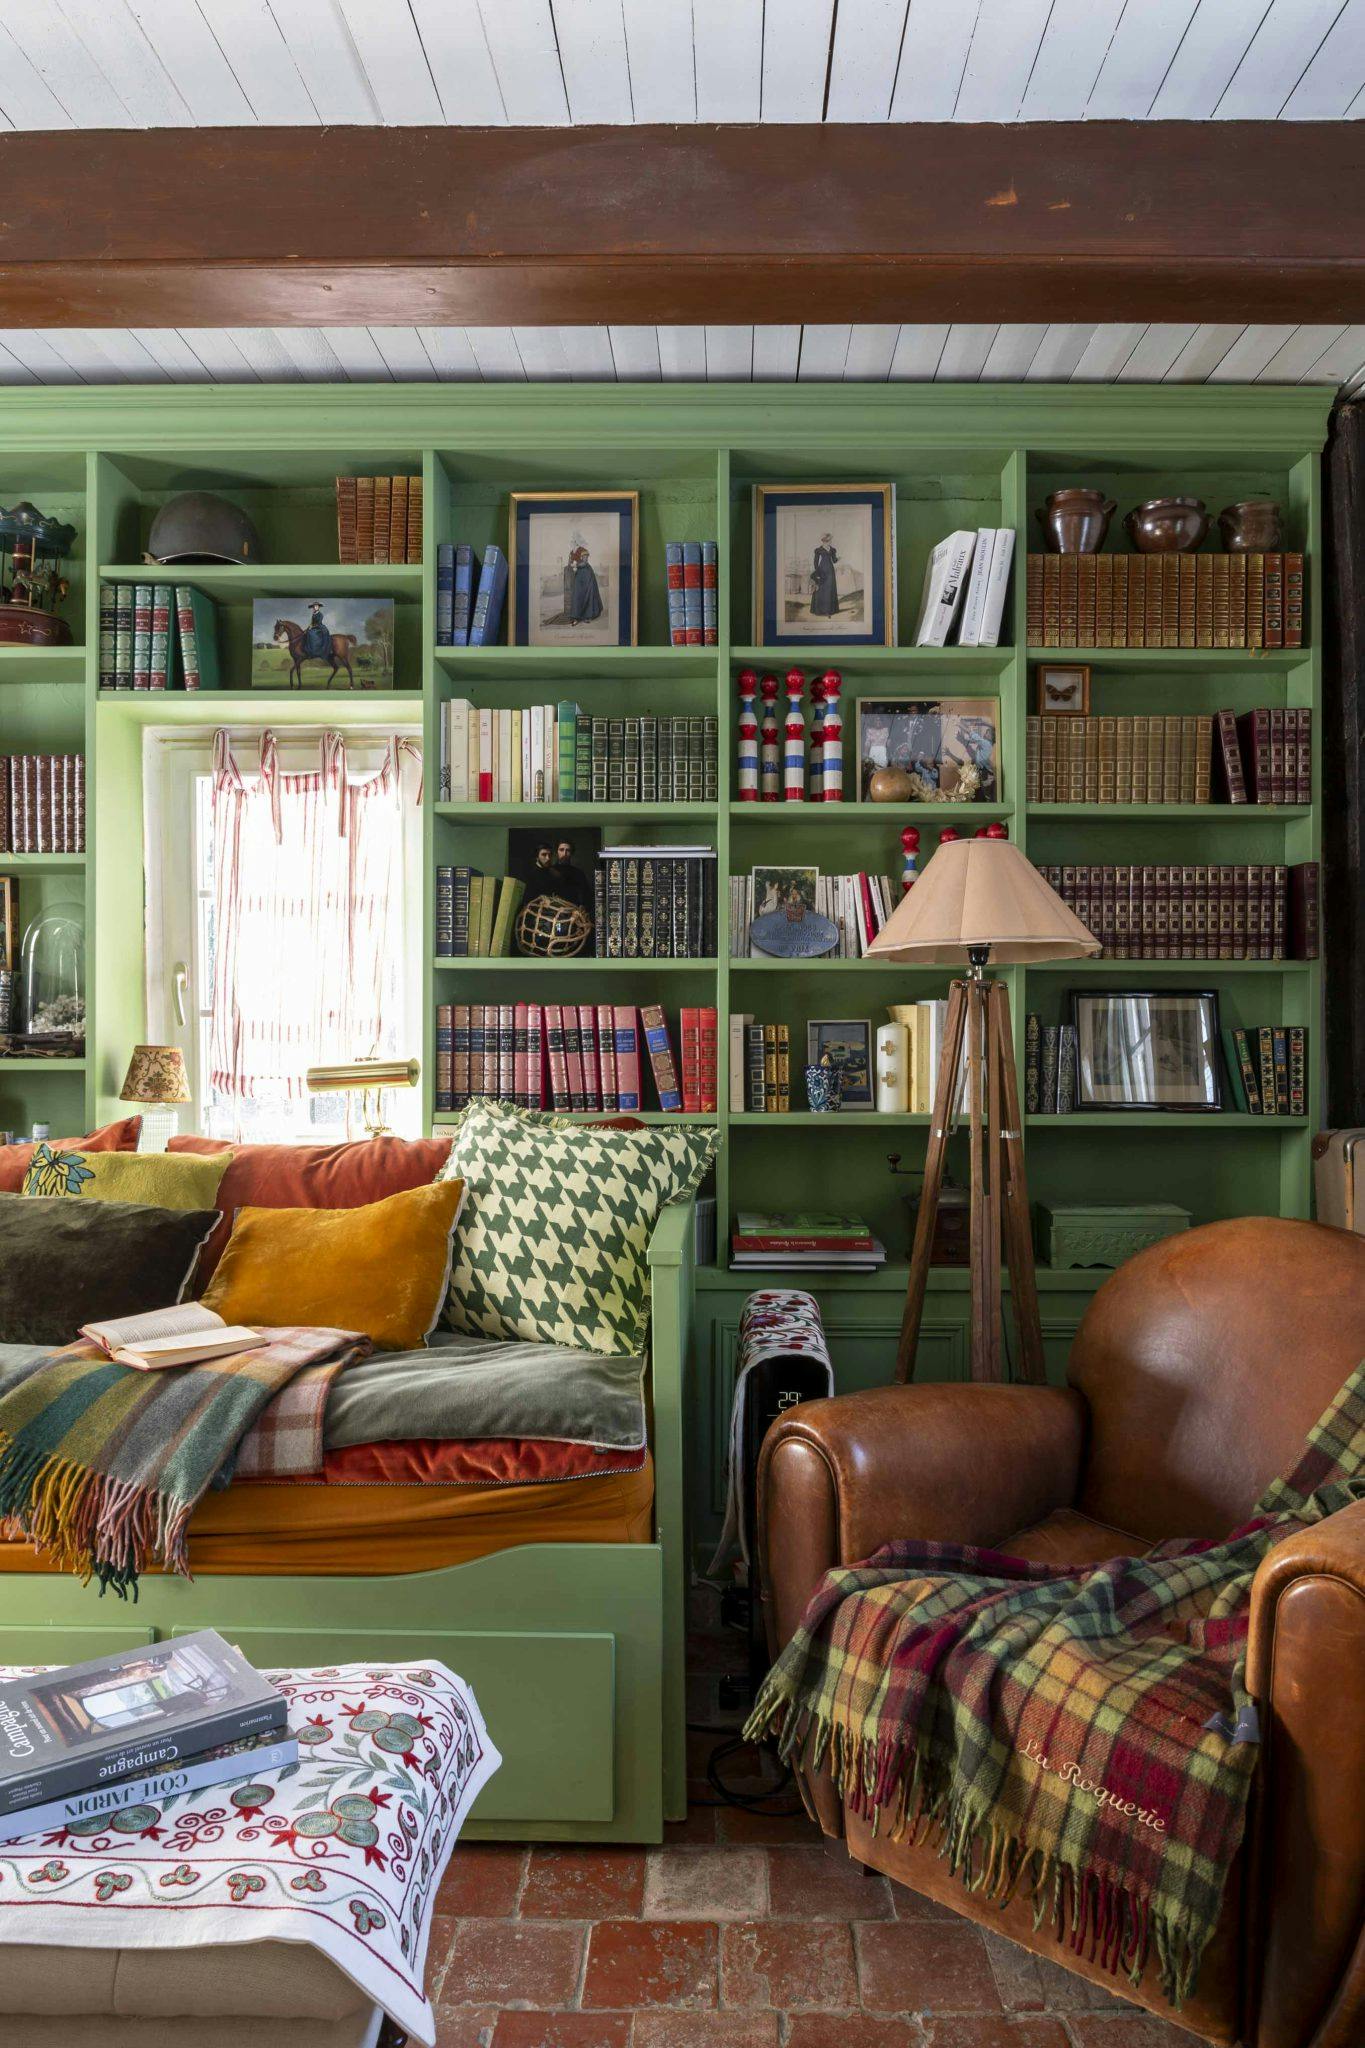 The living room, couch, green library